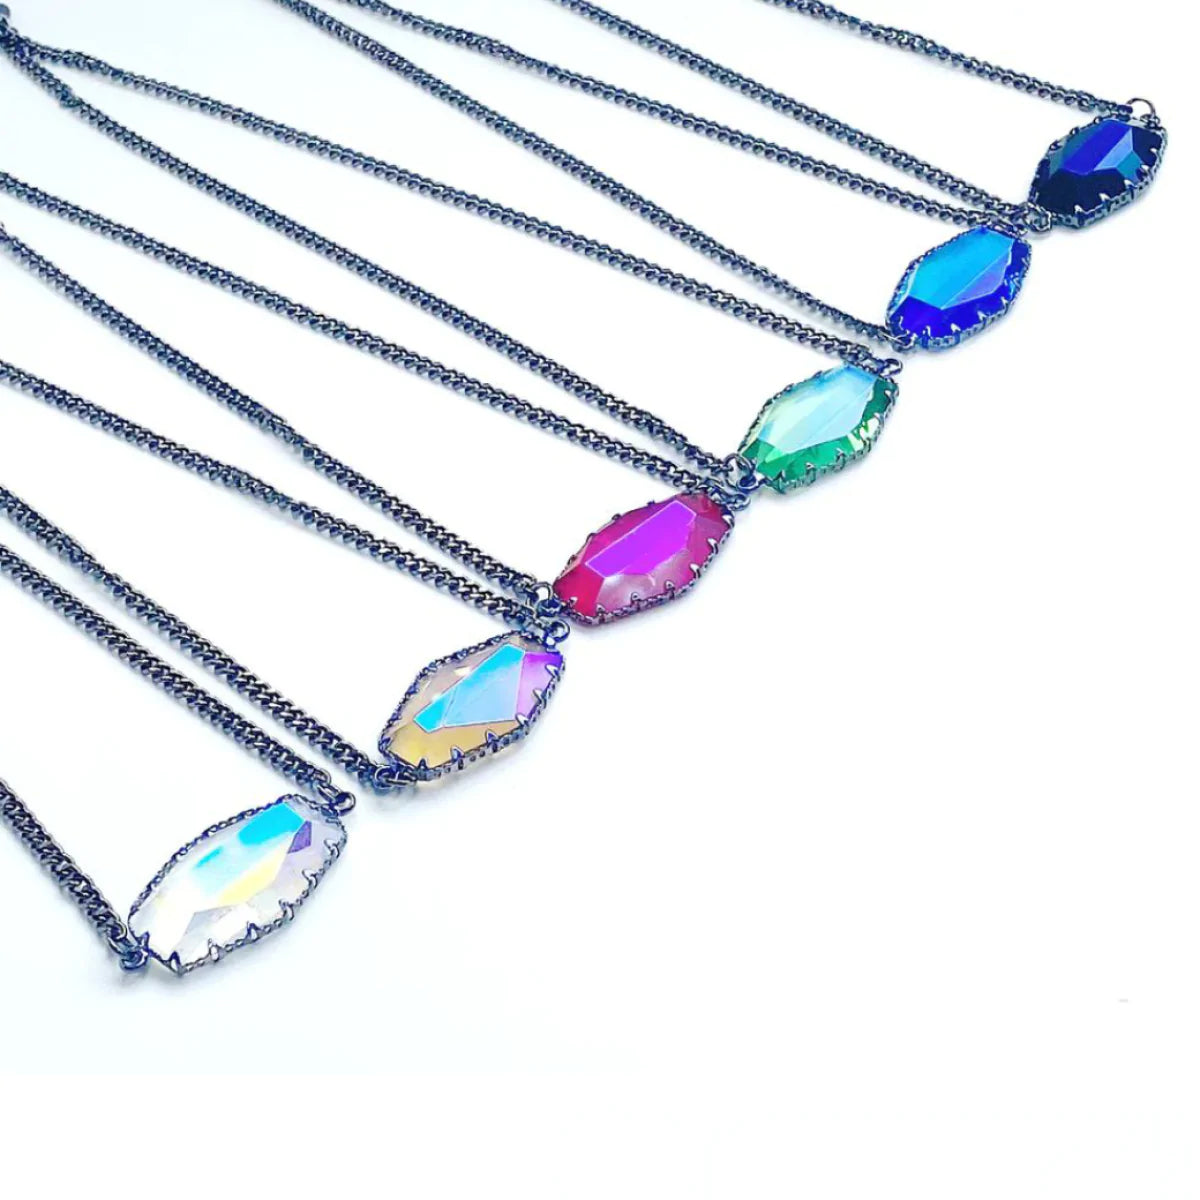 Geometrical Shaped Crystal Pendant Necklace in 3 Colors